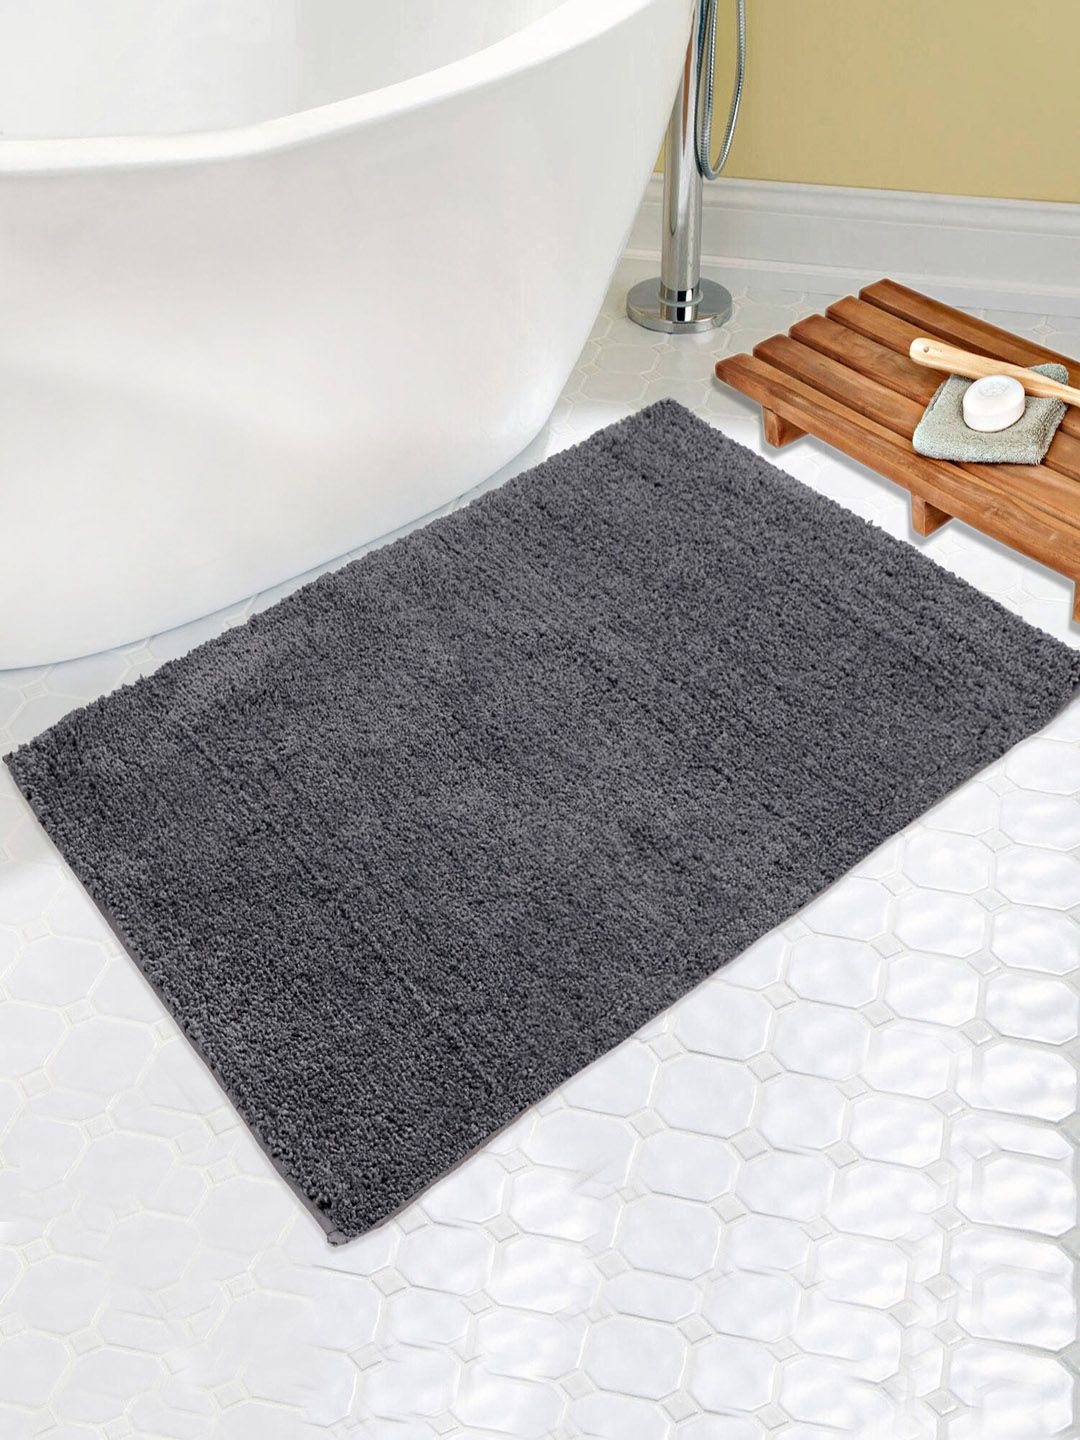 Saral Home Charcoal Grey Solid Microfibre Anti-Skid Bath Rug Price in India